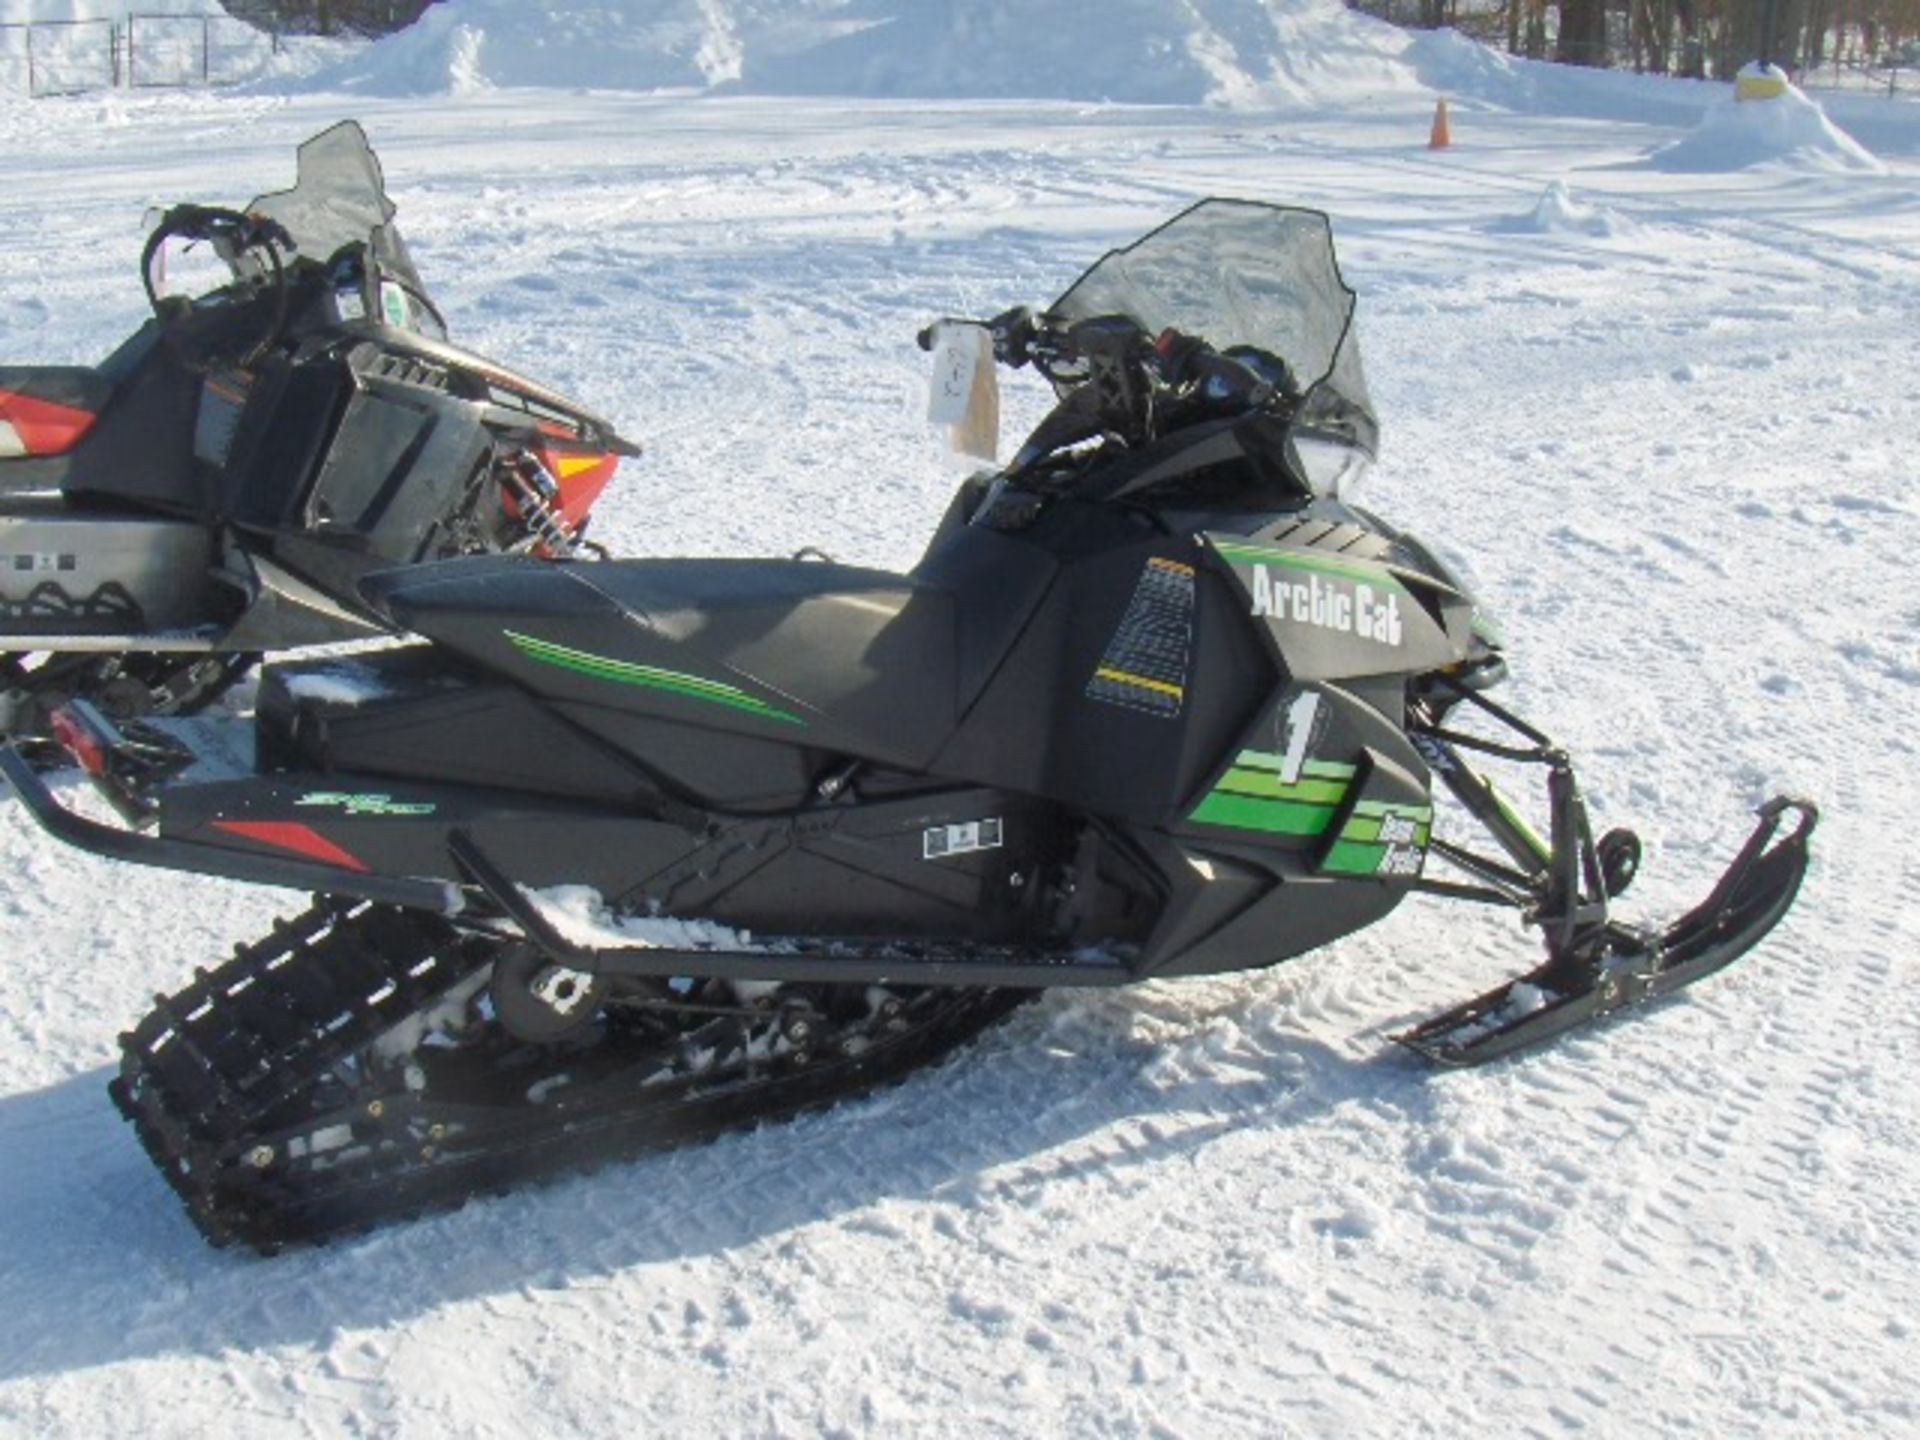 2012 ARCTIC CAT F 1100  4UF12SNW9CT116364 snowmobile, owner started at time of auction check in, - Image 3 of 4